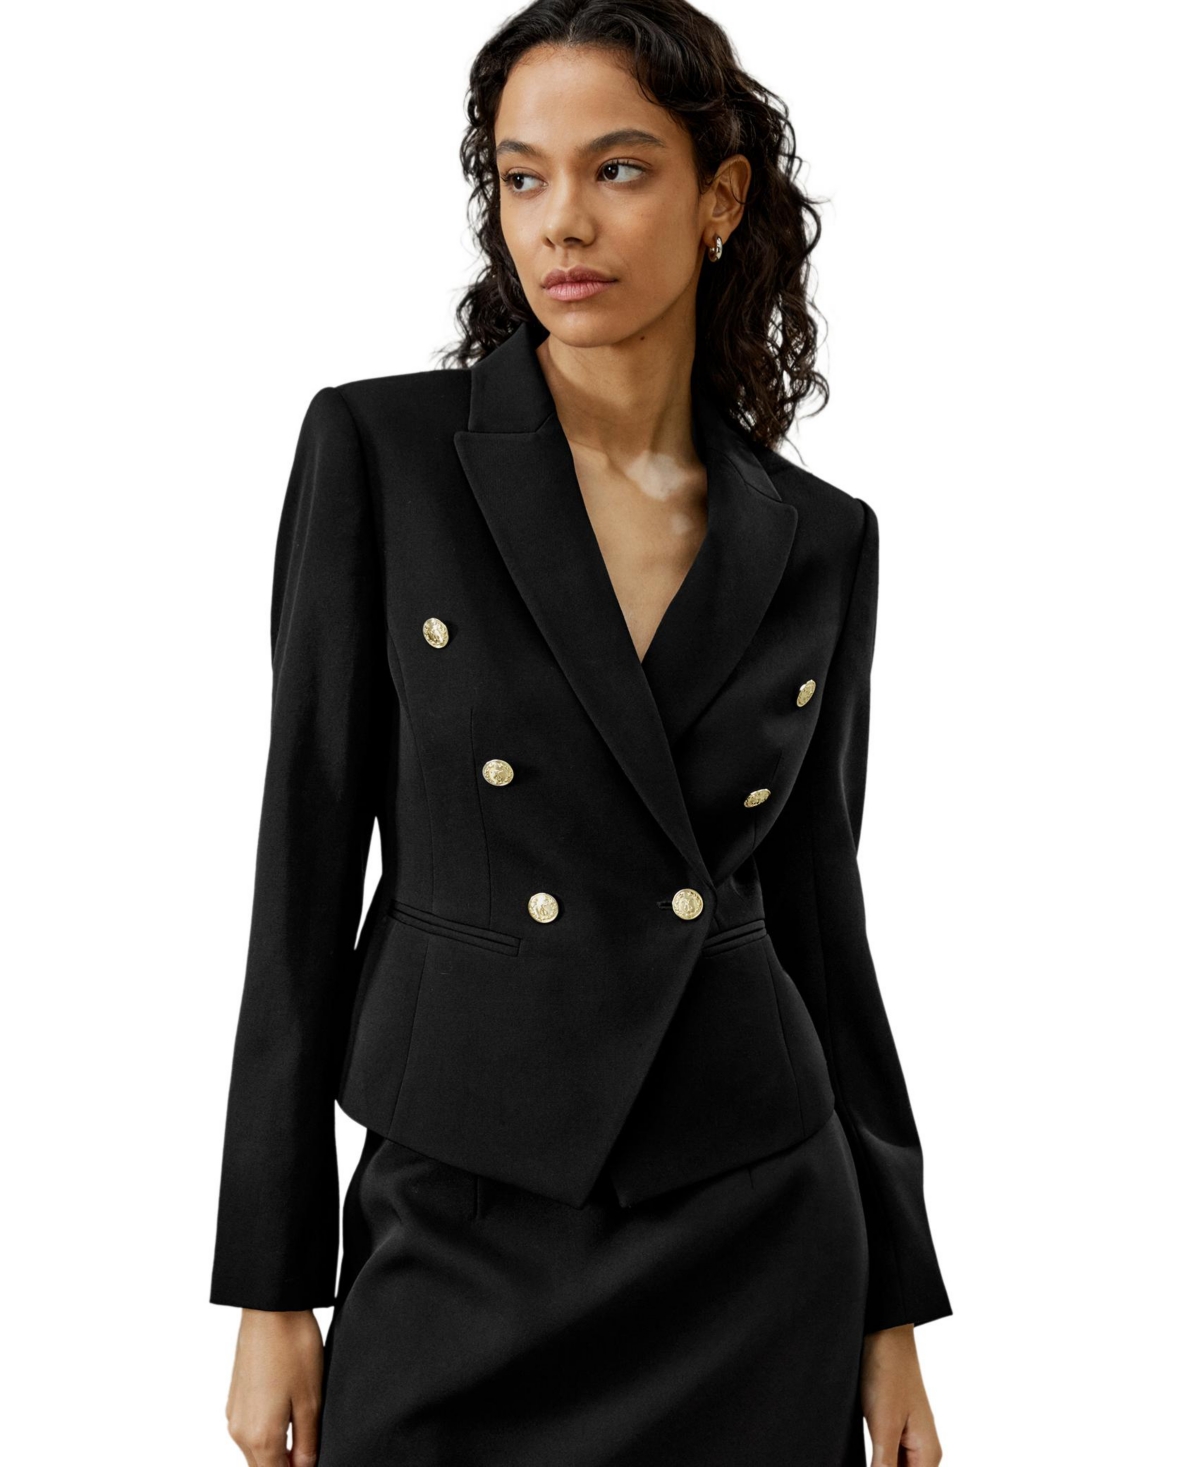 Women's Tailored Double-Breasted Blazer for Women - Black